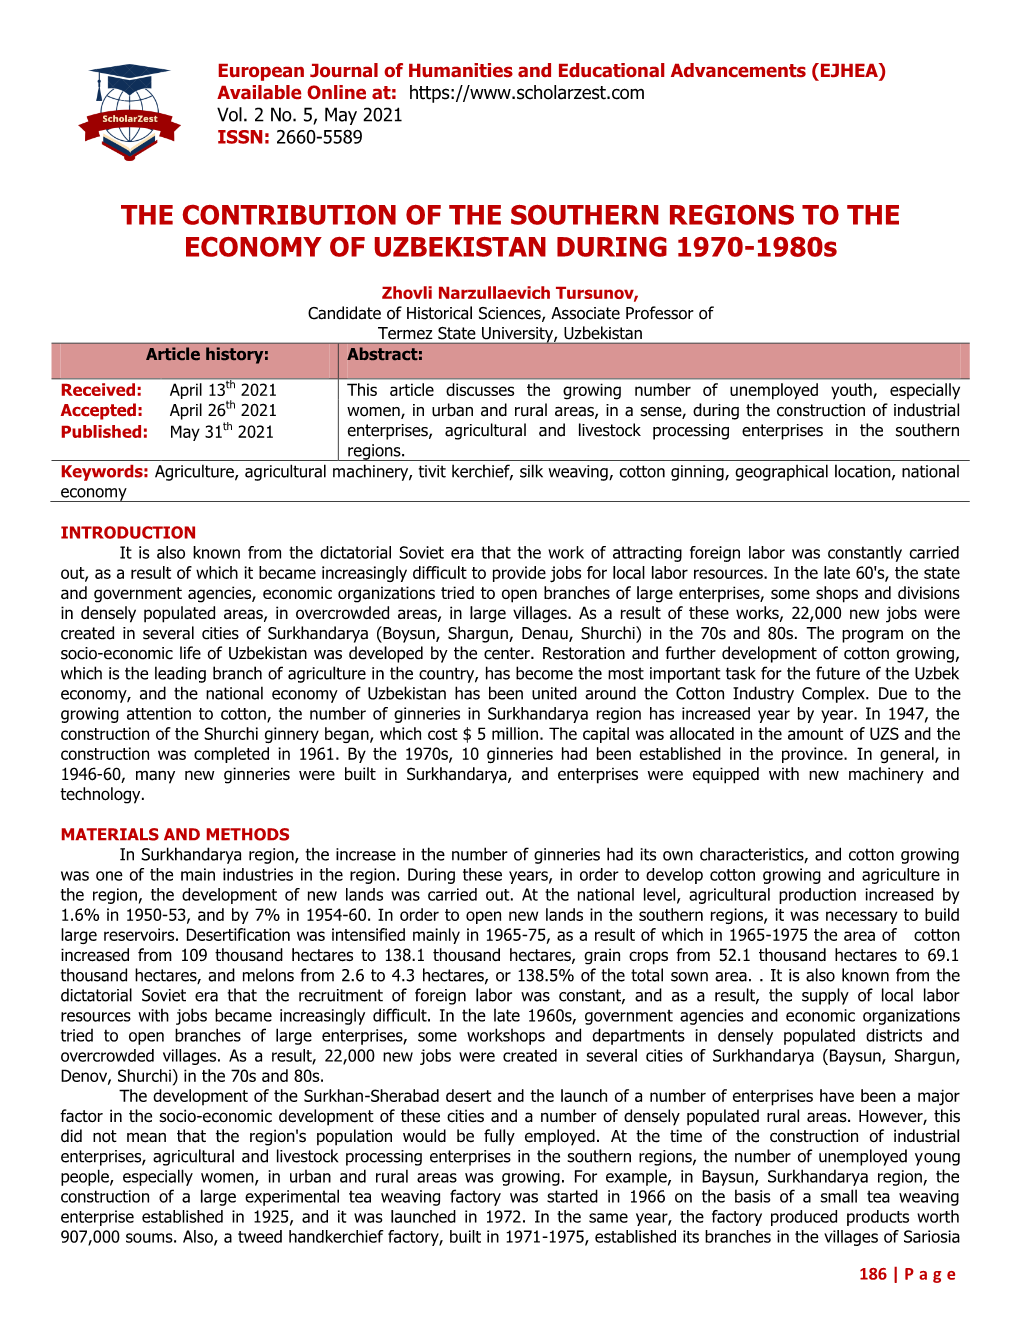 THE CONTRIBUTION of the SOUTHERN REGIONS to the ECONOMY of UZBEKISTAN DURING 1970-1980S